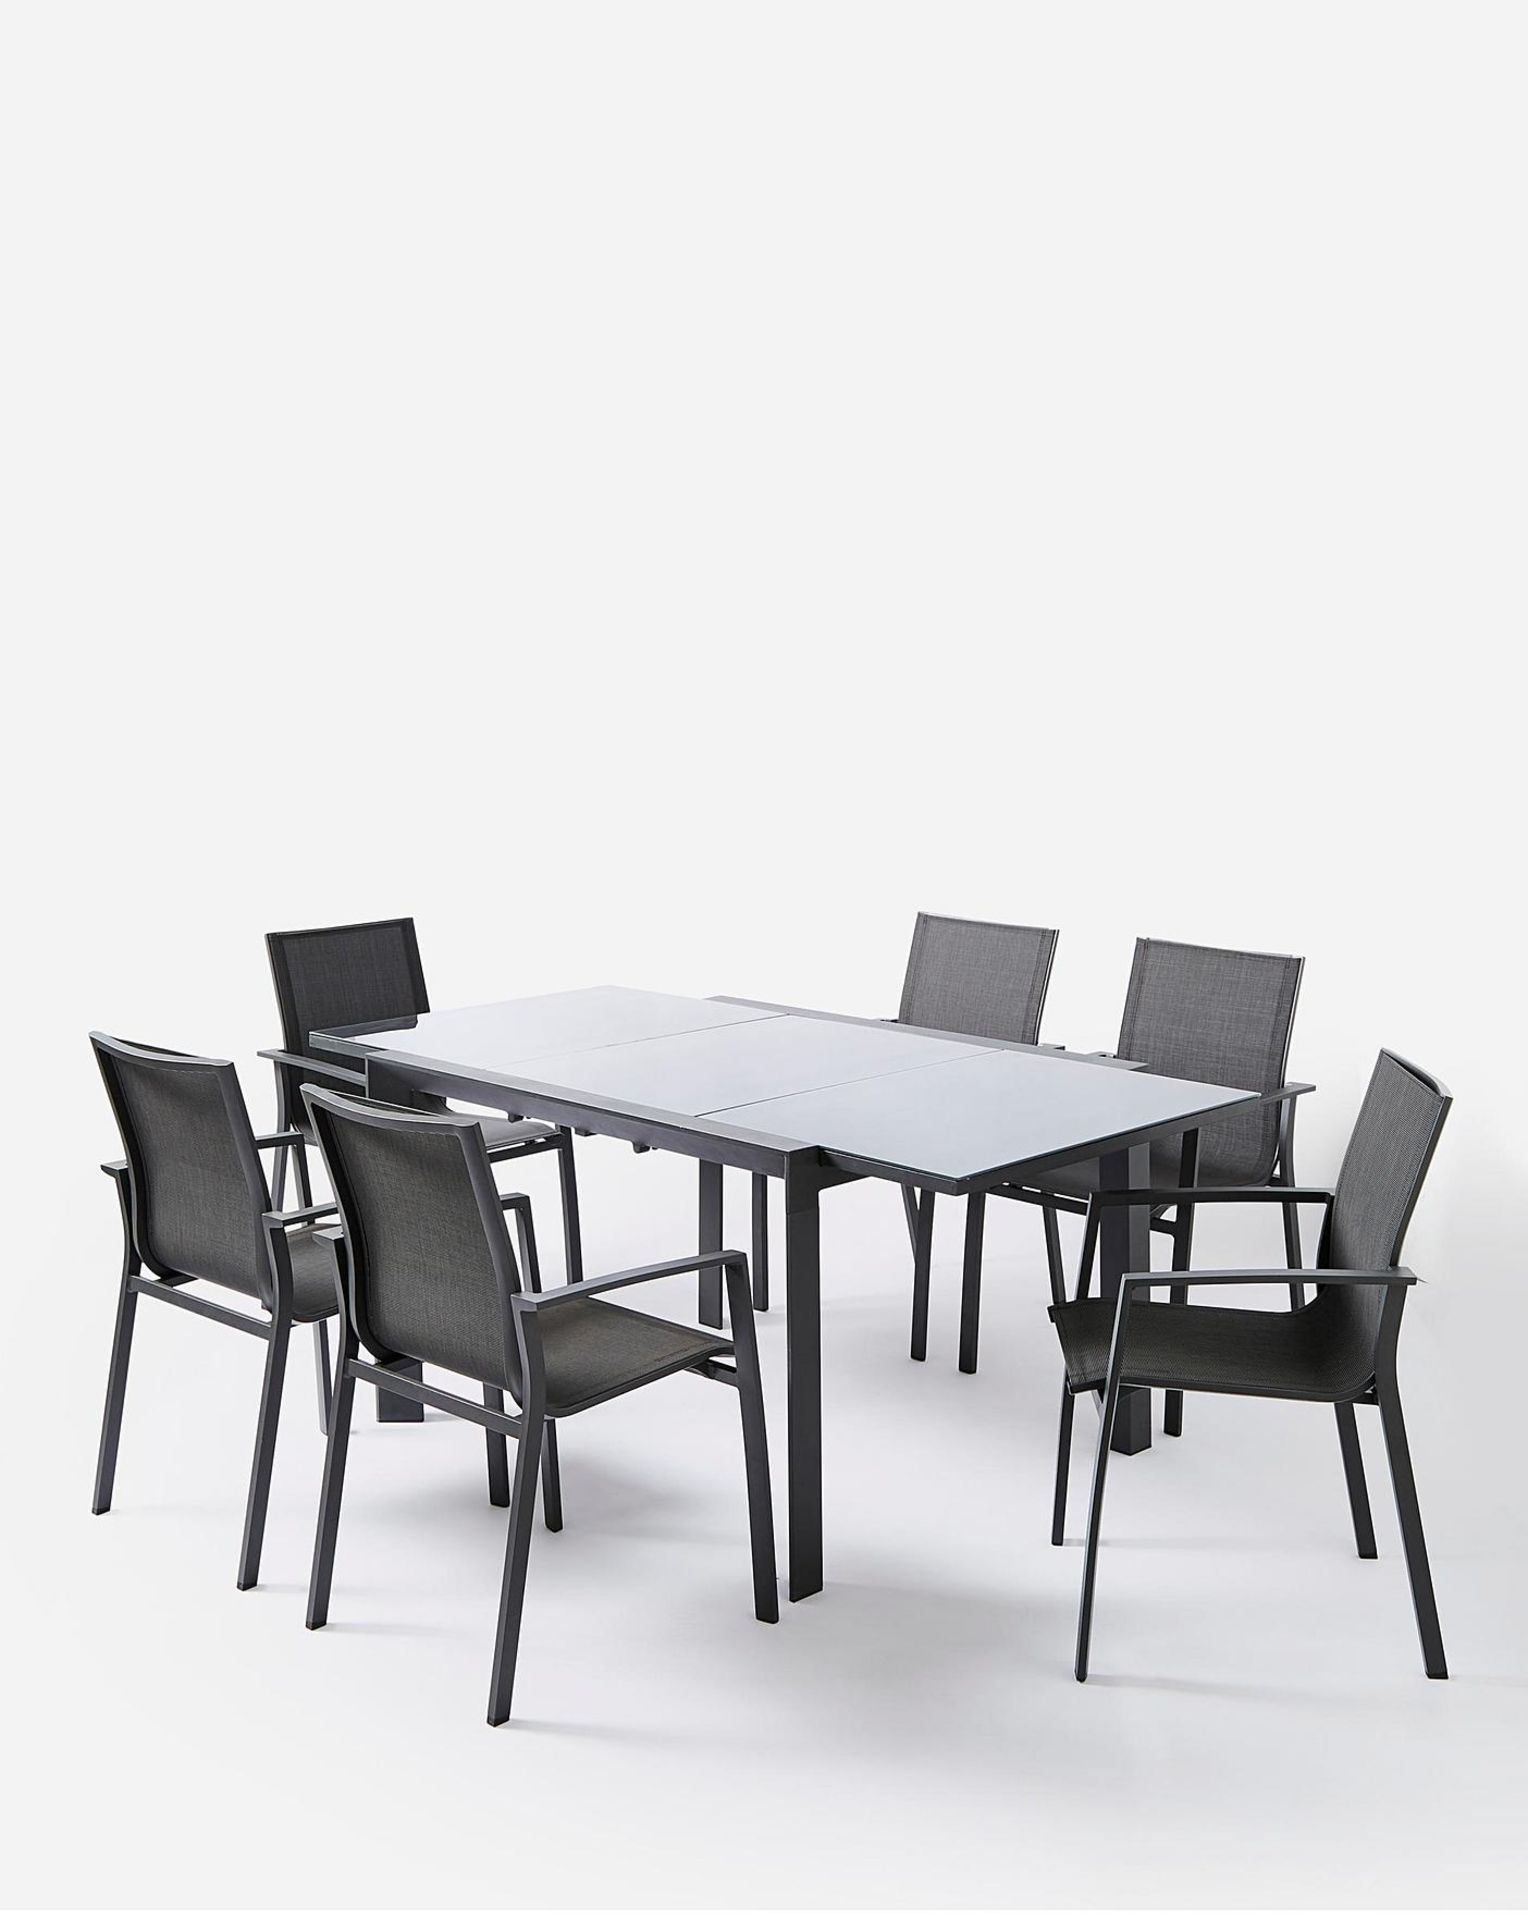 BRAND NEW Oslo 6 Seater Dining Set with Extendable Table. RRP £699 EACH. The Oslo Dining Set with - Bild 2 aus 4